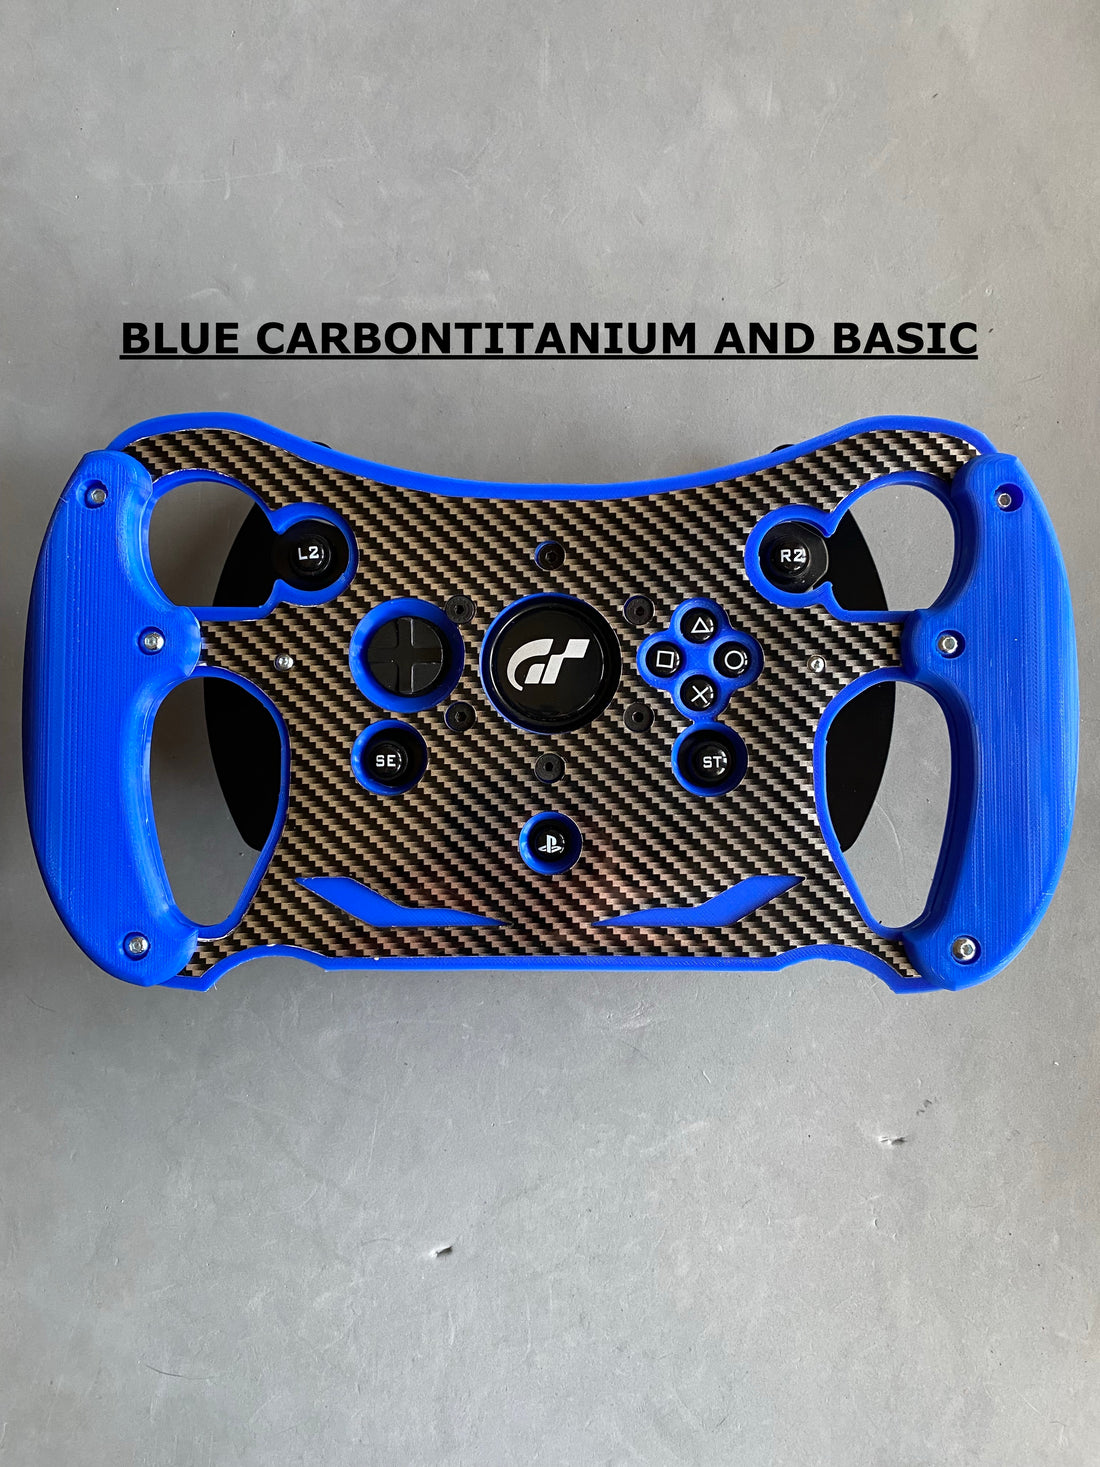 New Alcantara GT3 Open Wheel Mod for Thrustmaster T300, different colors